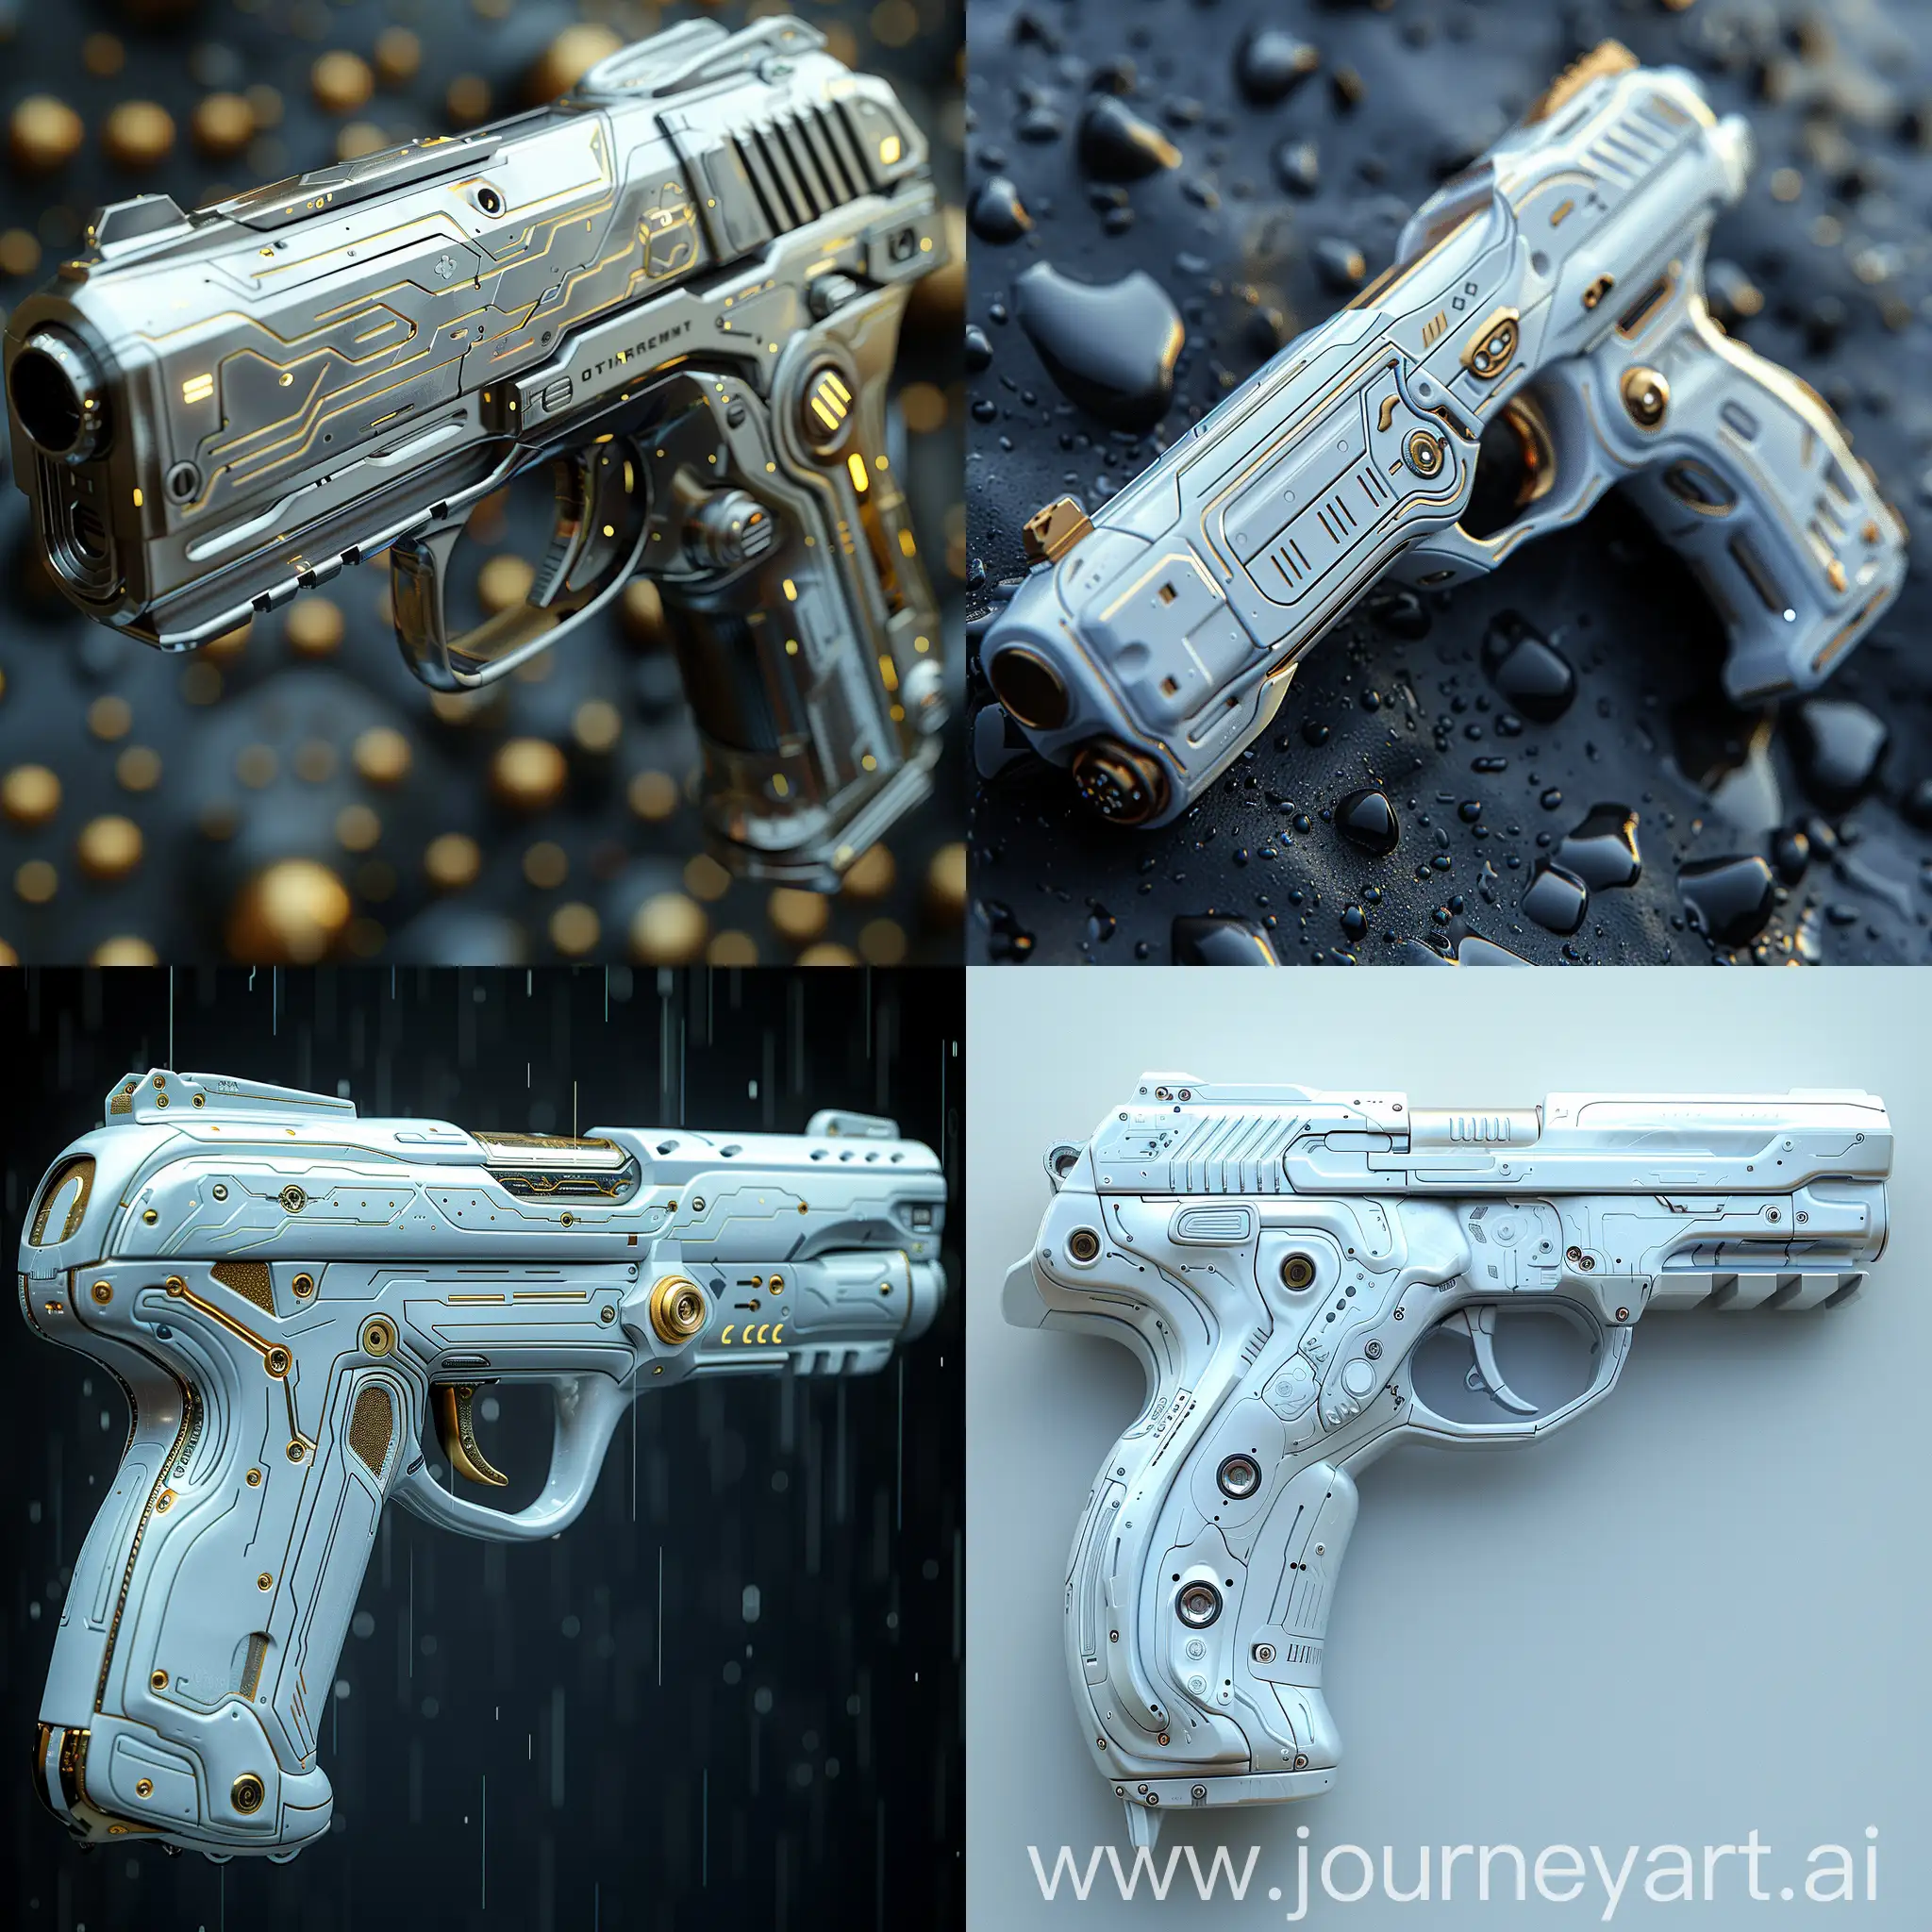 Futuristic-Stainless-Steel-Pistol-with-Cybernetic-Features